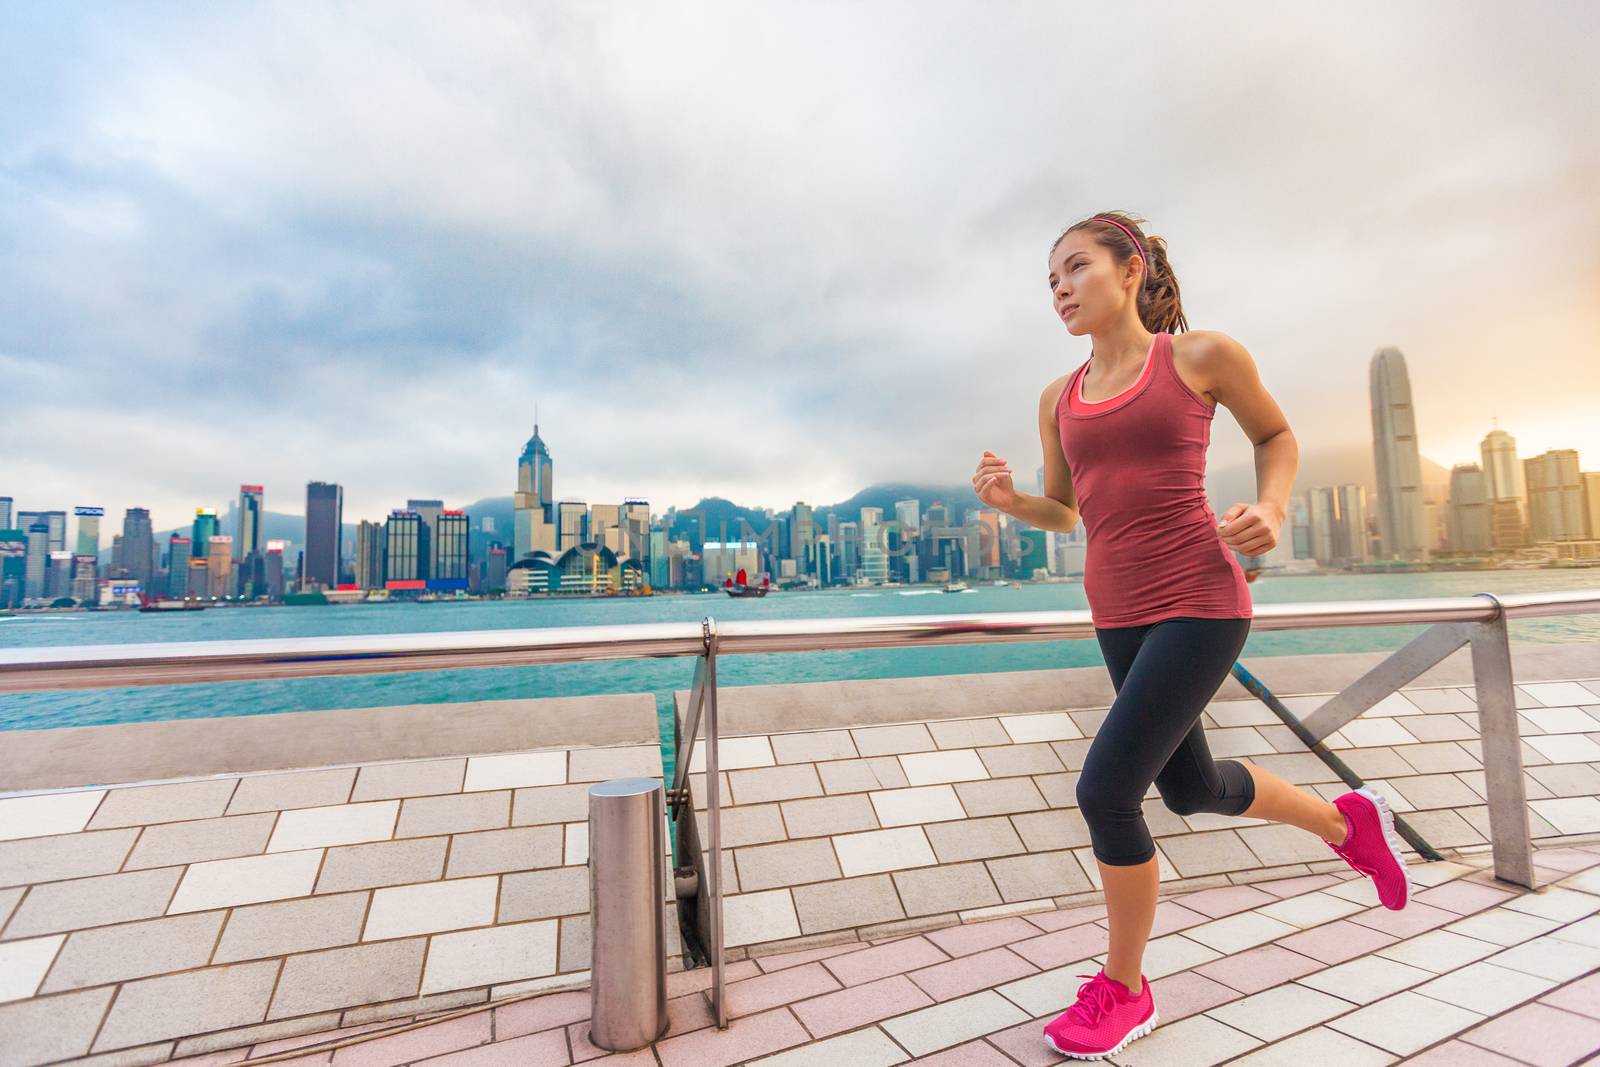 City Running - woman runner and Hong Kong skyline. Female athlete fitness athlete jogging training living healthy lifestyle on Tsim Sha Tsui Promenade and Avenue of Stars in Victoria Harbour, Kowloon by Maridav